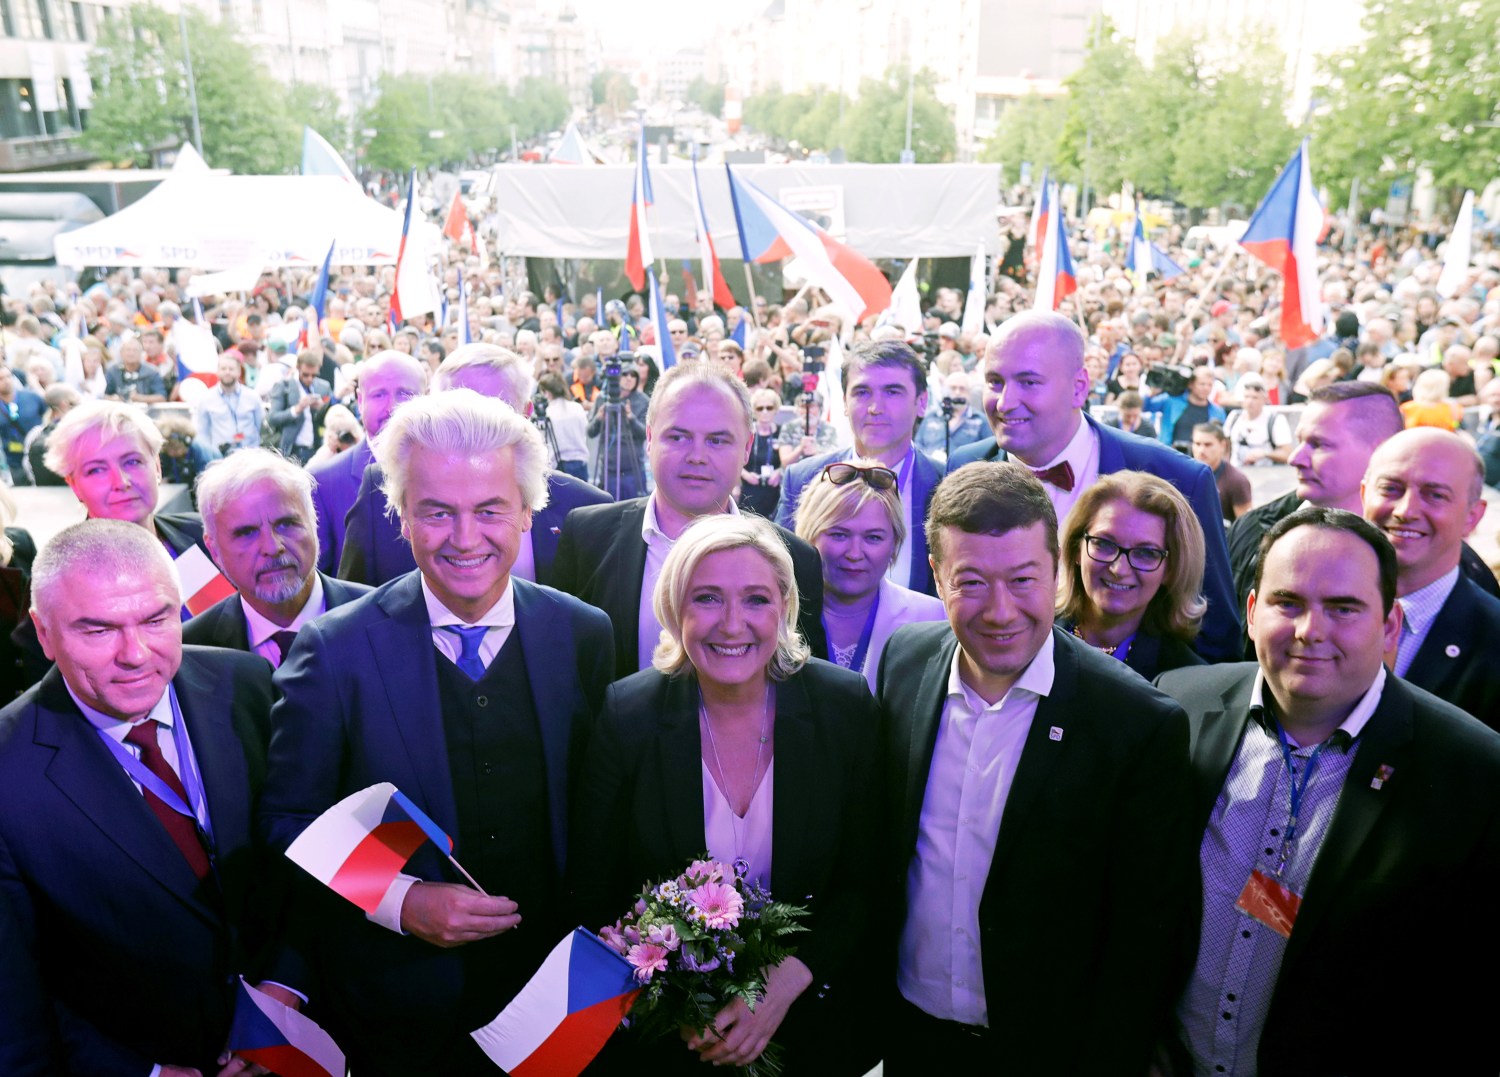 Marine Le Pen, head of France's far-right National Rally (RN) party, Tomio Okamura, leader of Czech far-right Freedom and Direct Democracy (SPD) party, and Dutch far-right politician Geert Wilders of the PVV, attend the European far-right leaders meeting at Wenceslas Square in Prague, Czech Republic April 25, 2019. REUTERS/David W Cerny - RC1B549ECA30